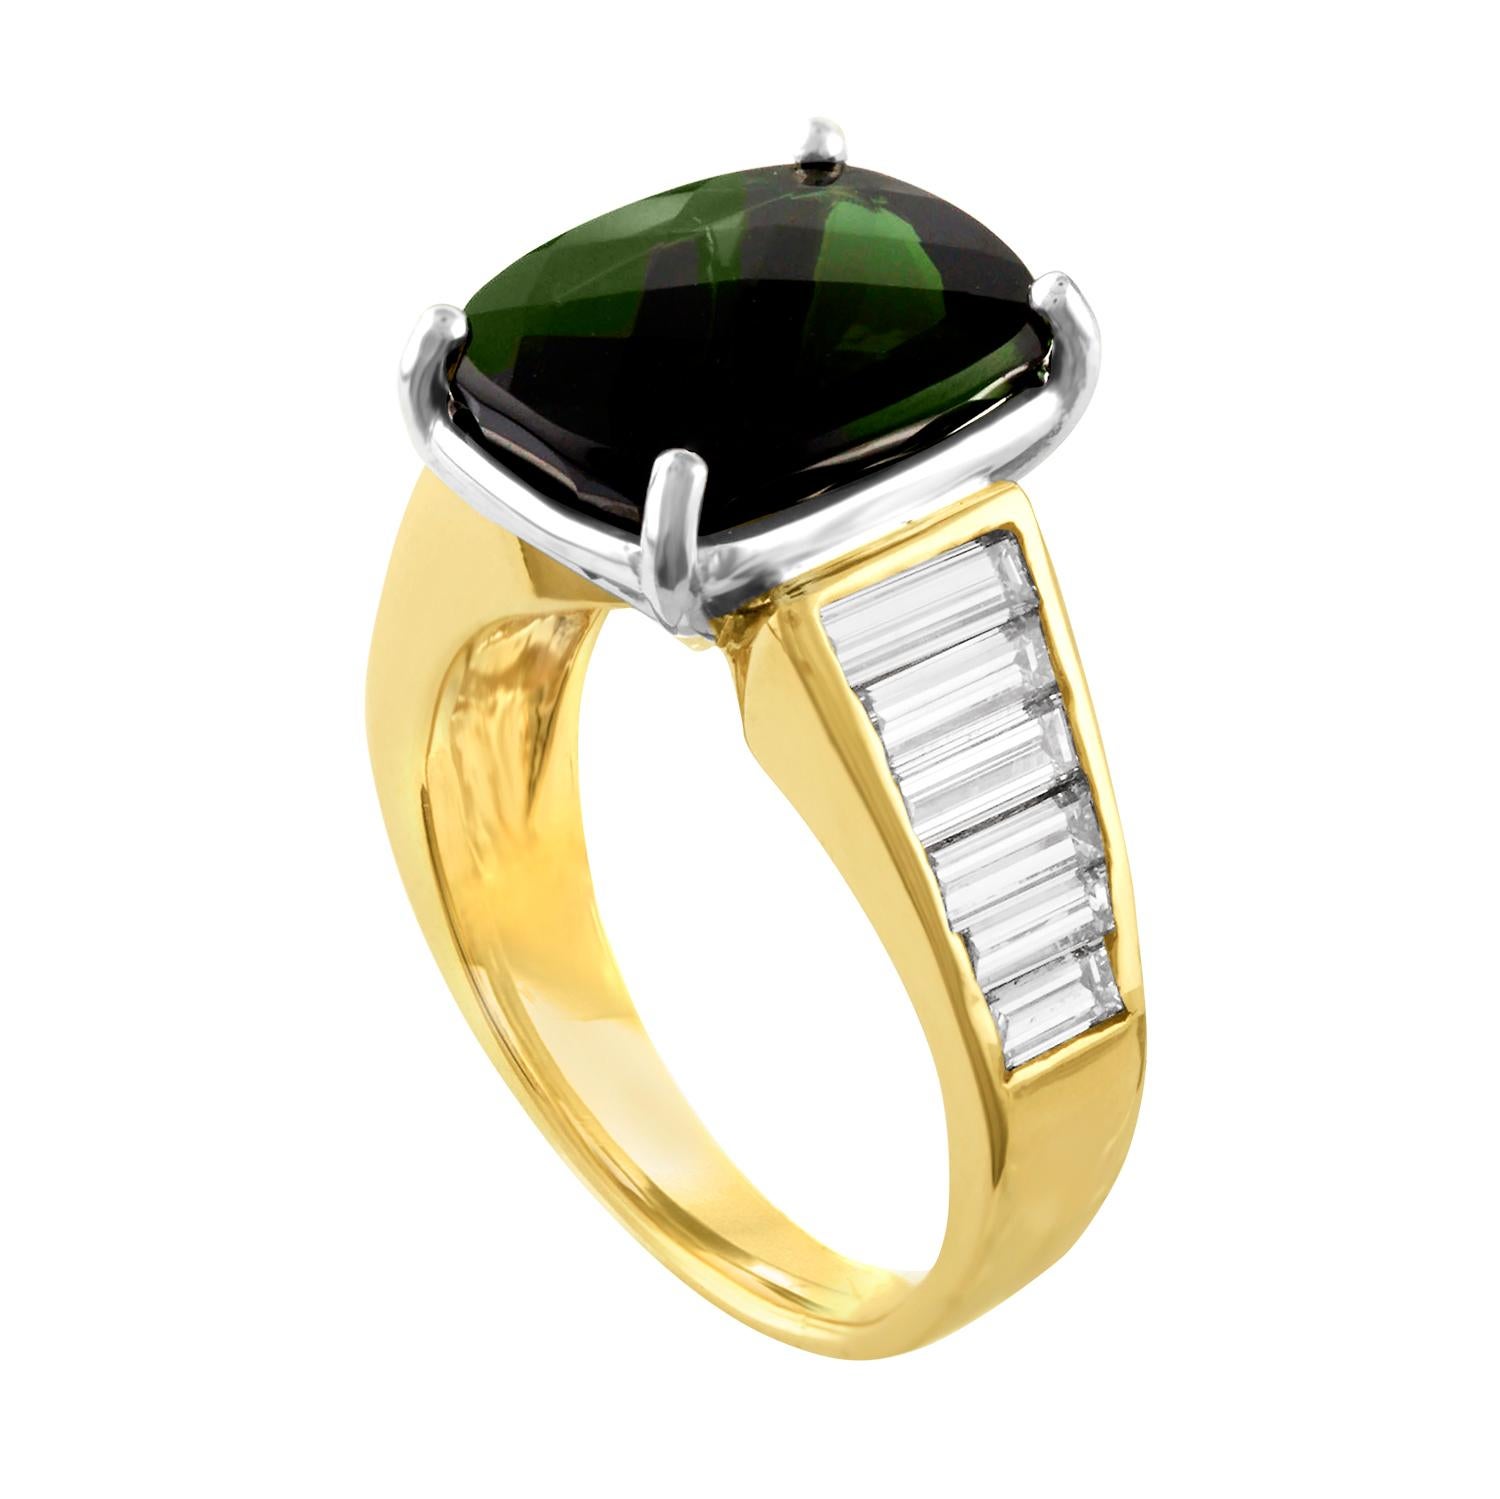 Beautiful Cocktail Ring
The ring is 14K White & Yellow Gold
The center stone is 5.23 Carats Cushion Green Tourmaline
There are 1.25 Carats in Baguette Diamonds F VS
The ring is a size 5.5, sizable.
The ring weighs 6.4 grams